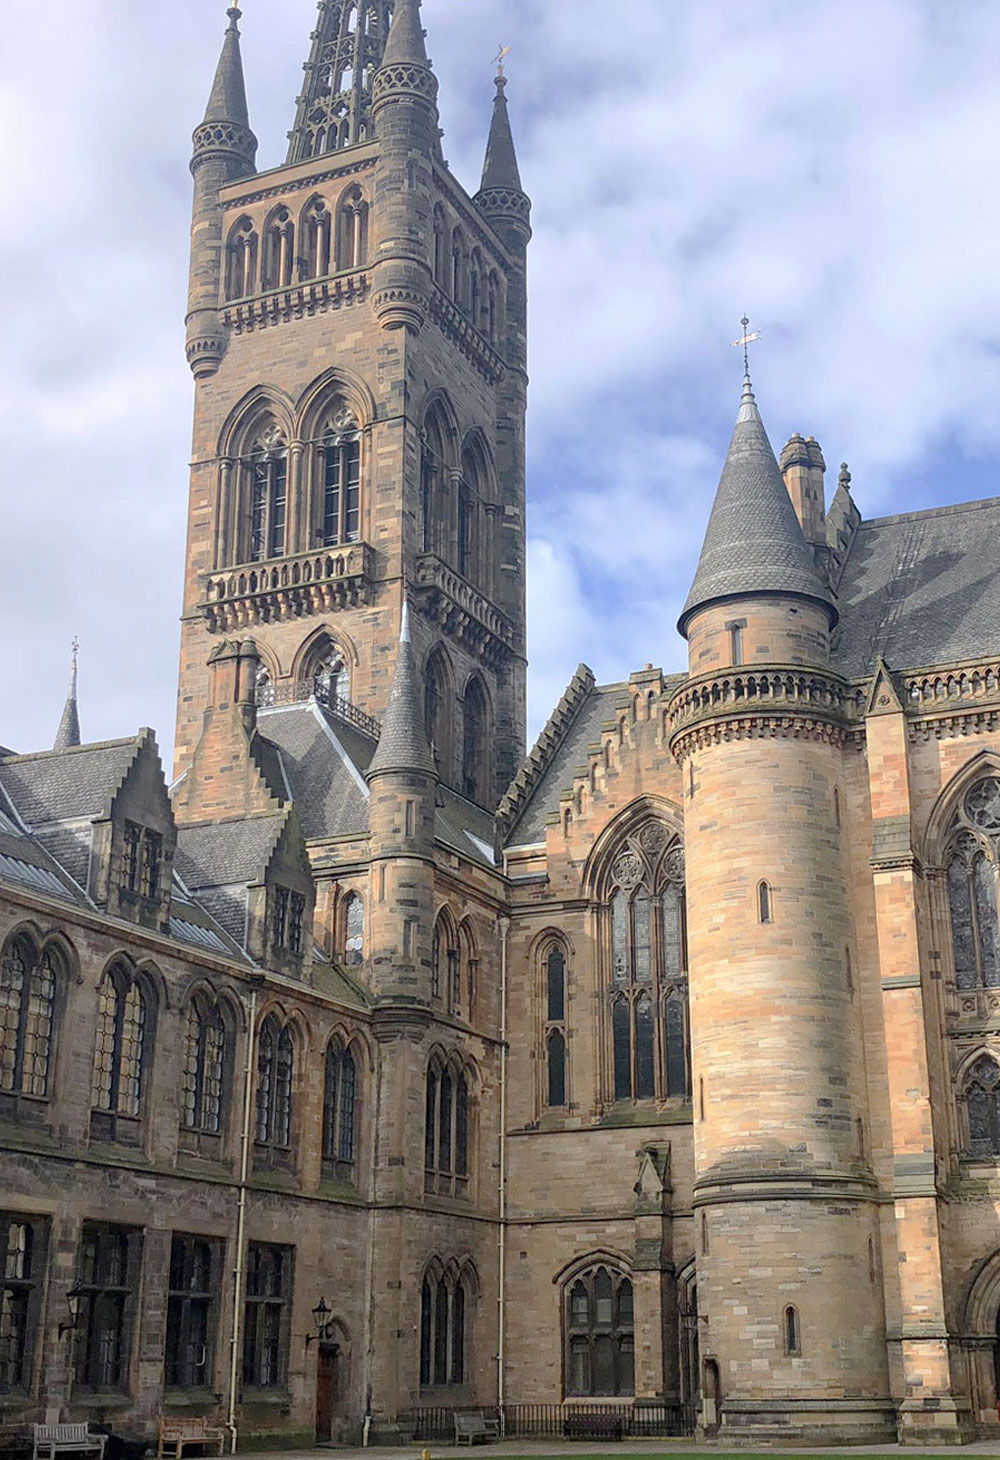 Exterior view of the main building at the University of Glasgow